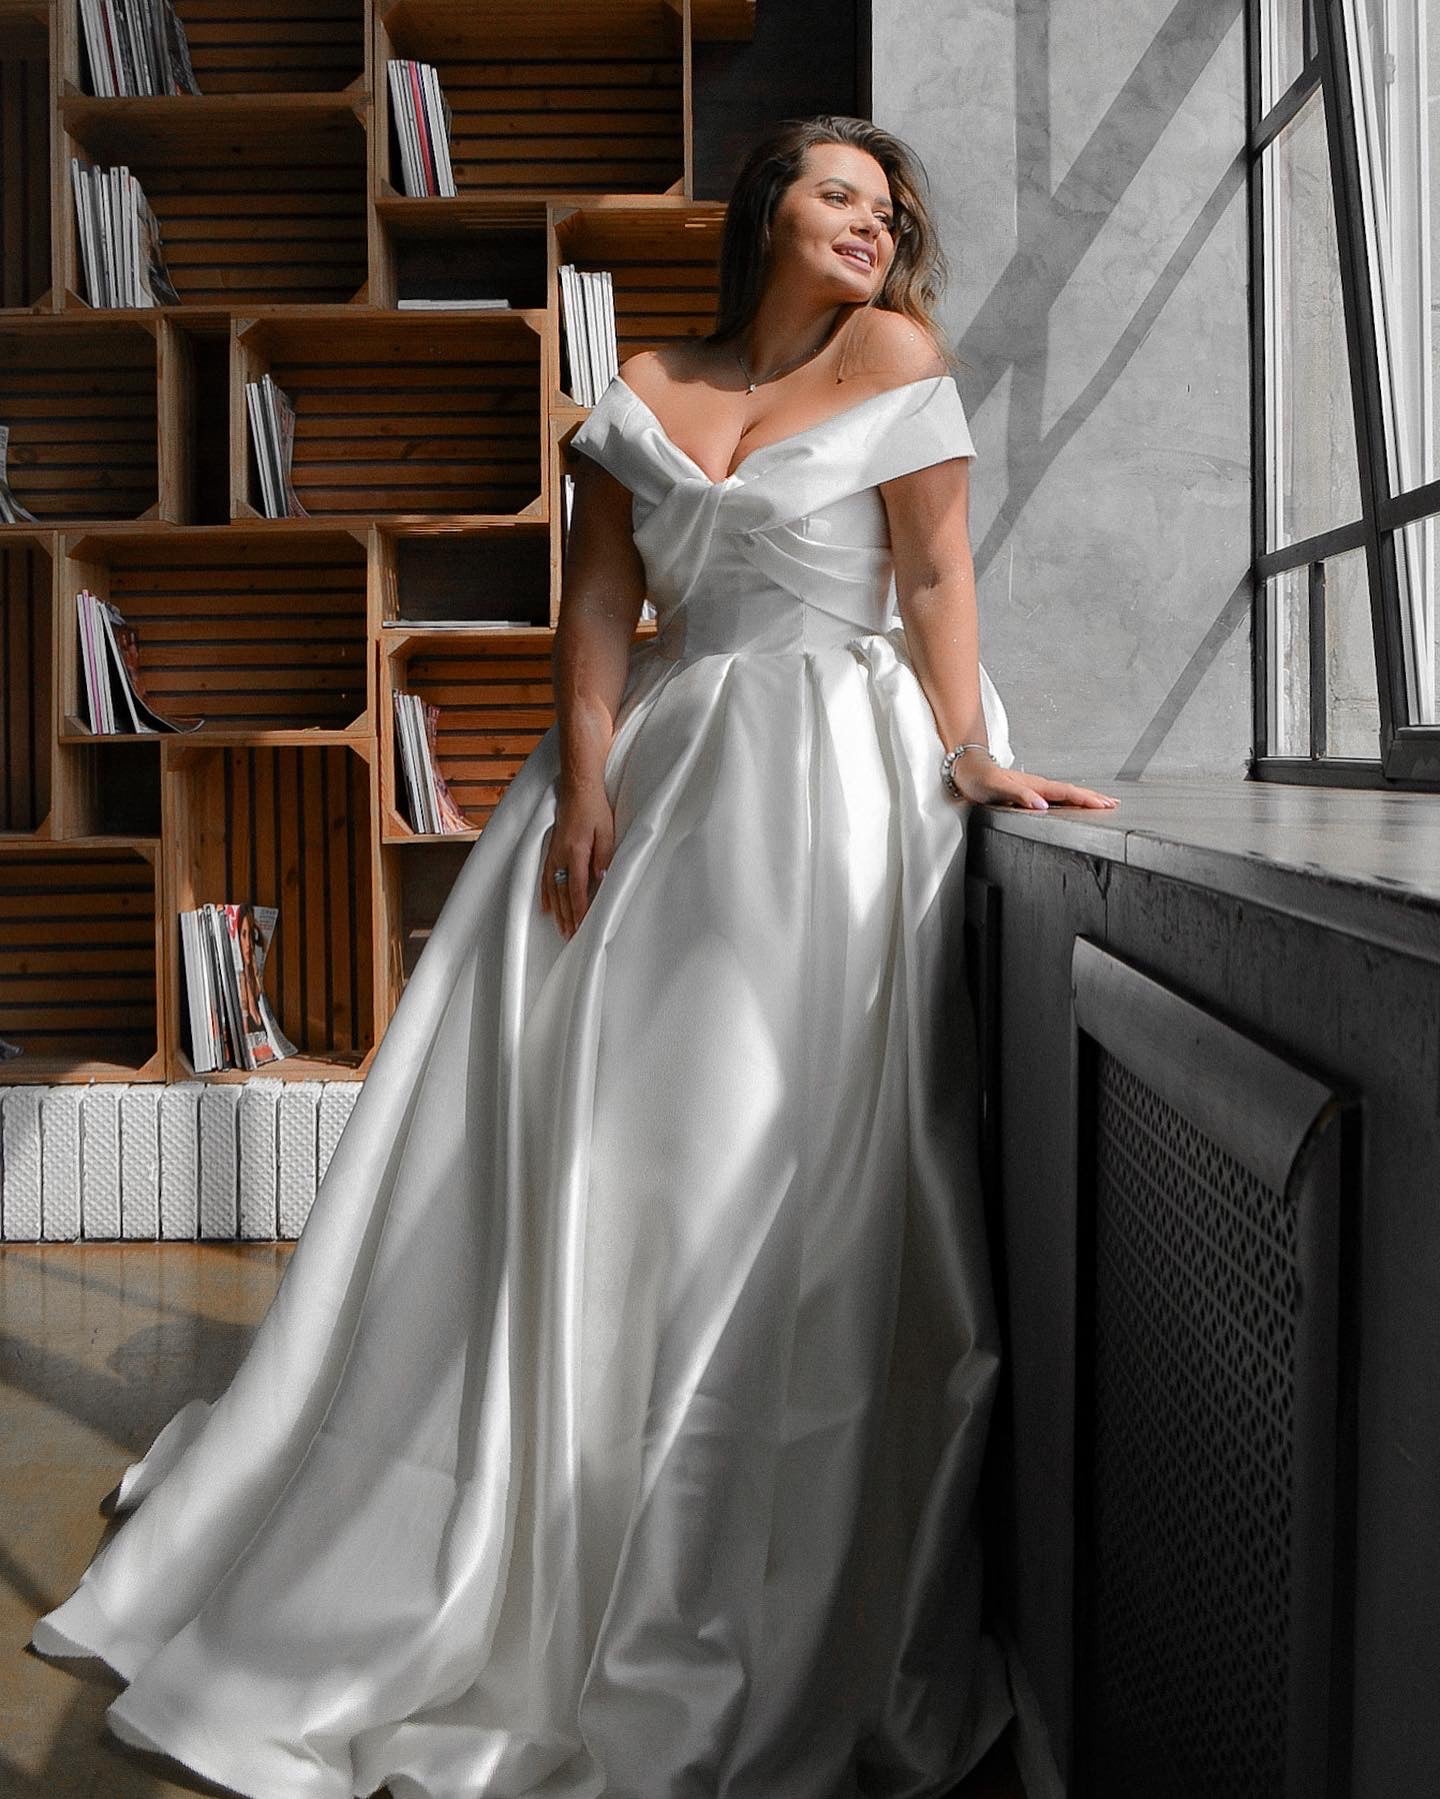 A-line Satin Wedding Dress SIBI With a Corset and a Skirt With a Train -   Ireland